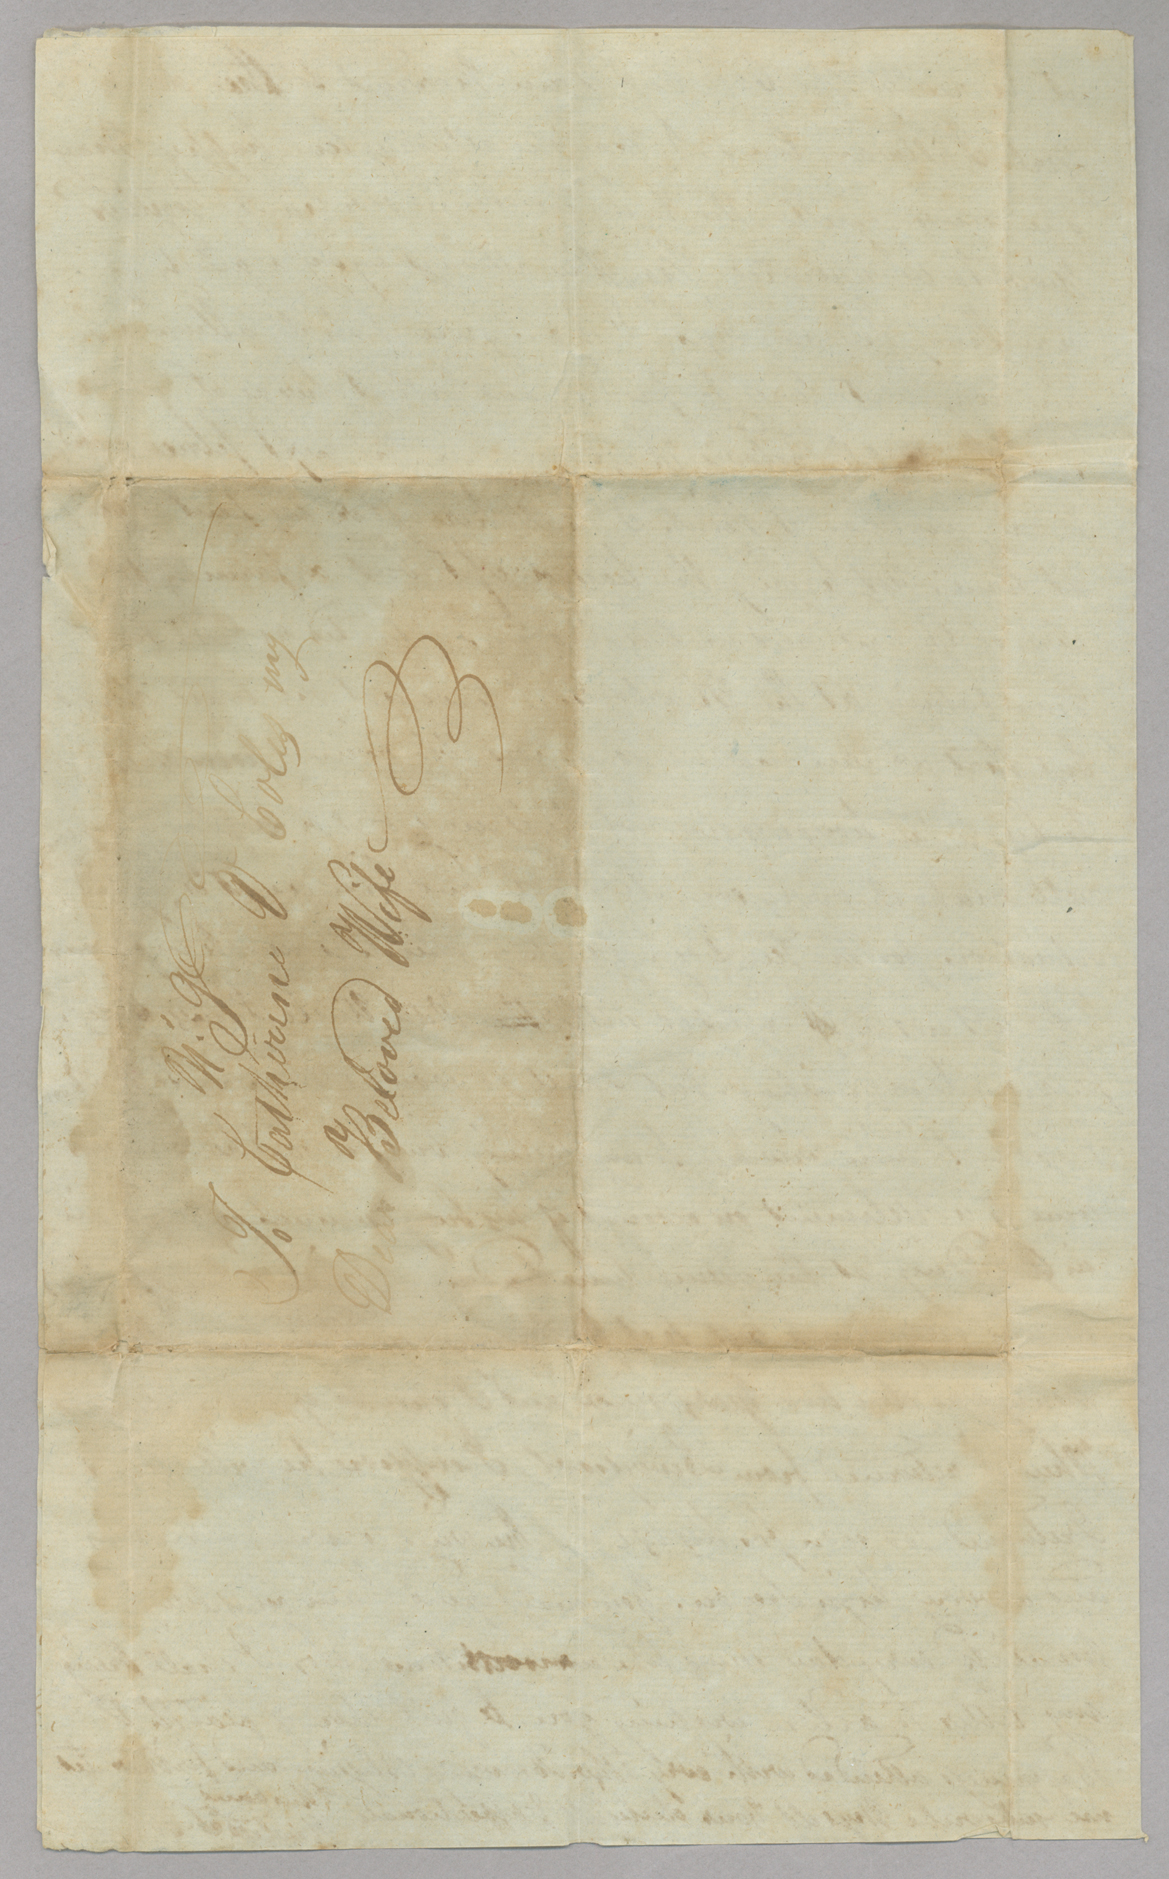 Letter, Hewlett T[ownsend] Coles, n.p., to Catherine V[an Suydam] Coles, n.p., Address Leaf